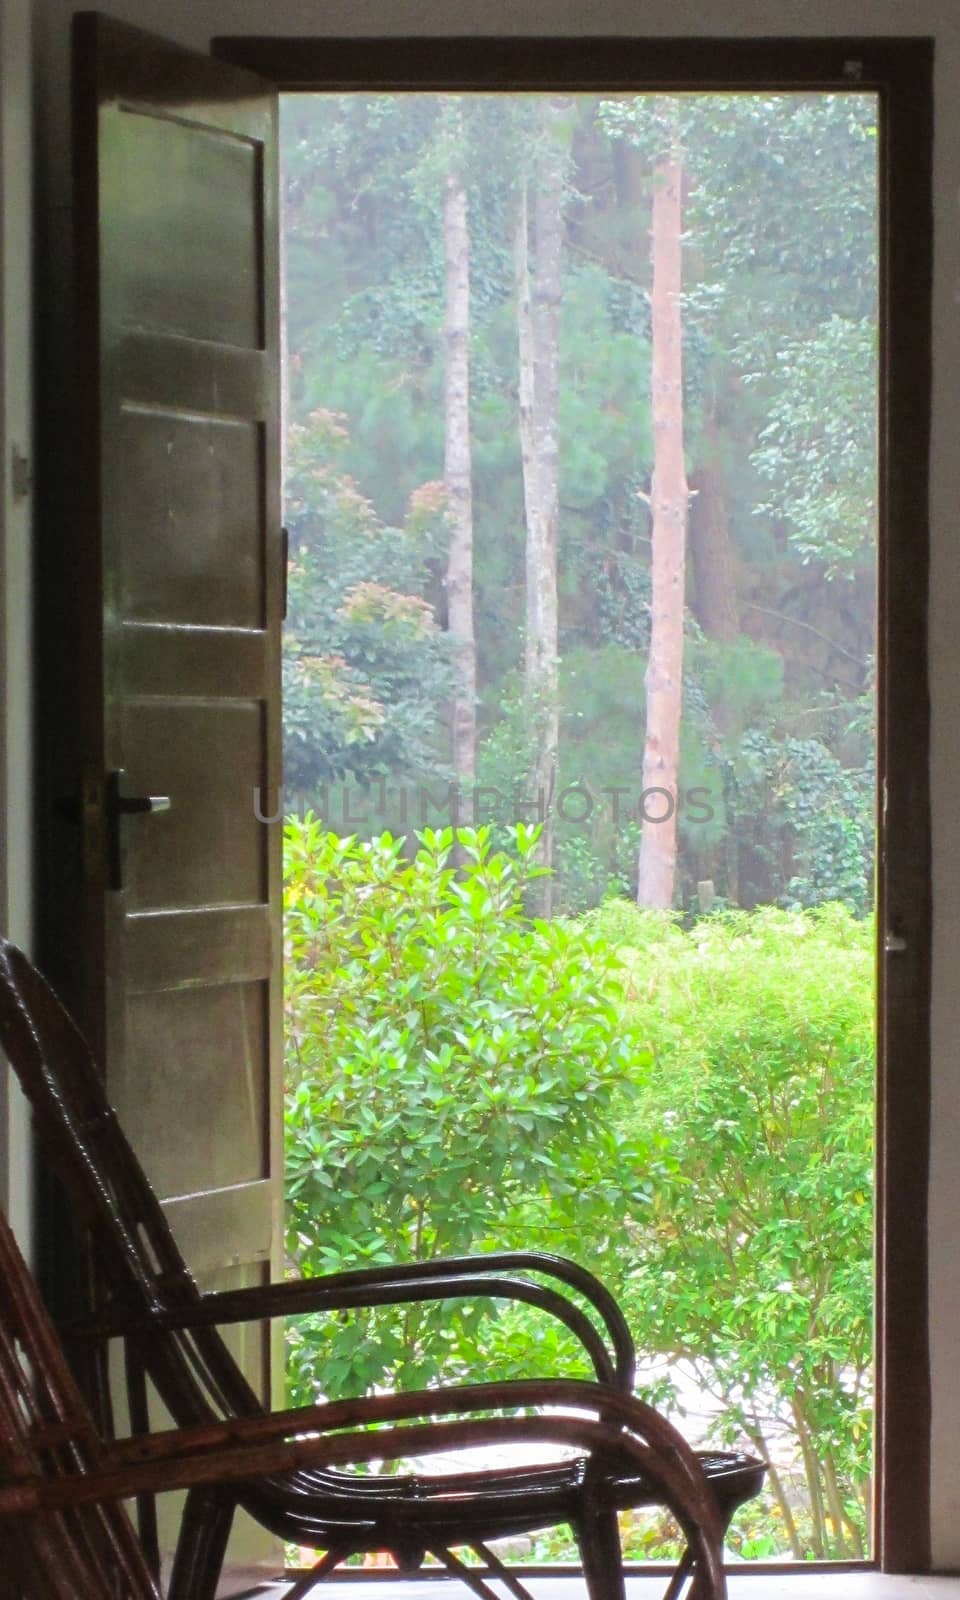 Open door with a chair in front leads to a wooden backyard with green bushes on a misty day.